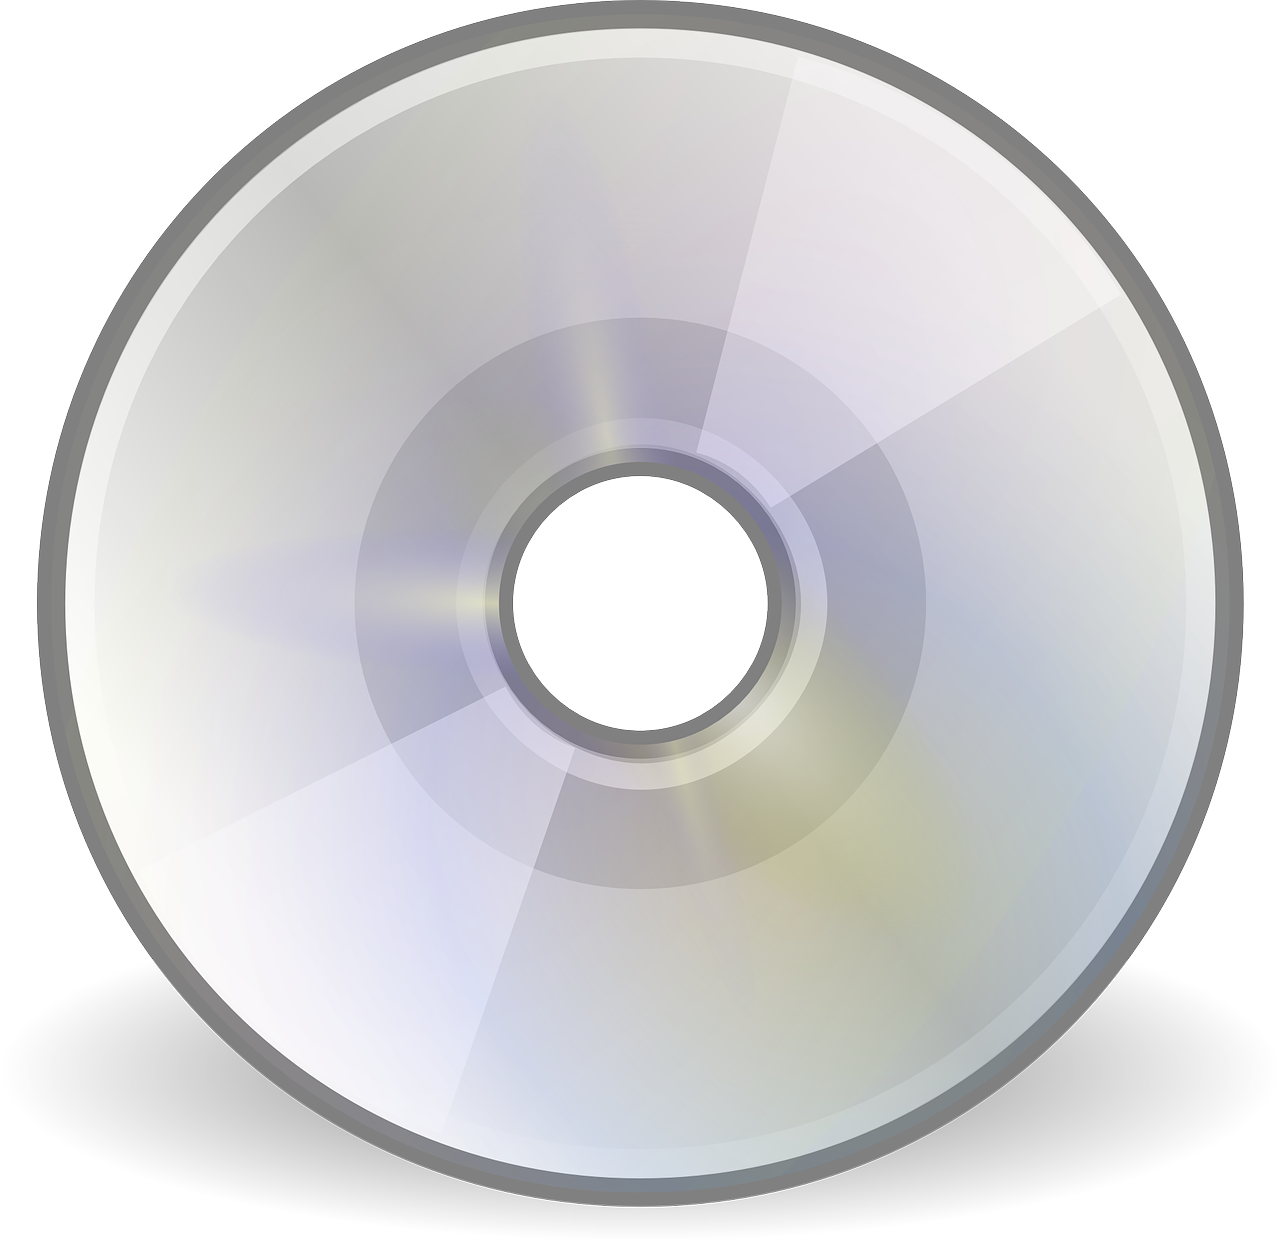 Silver CD Disk Vector PNG Image